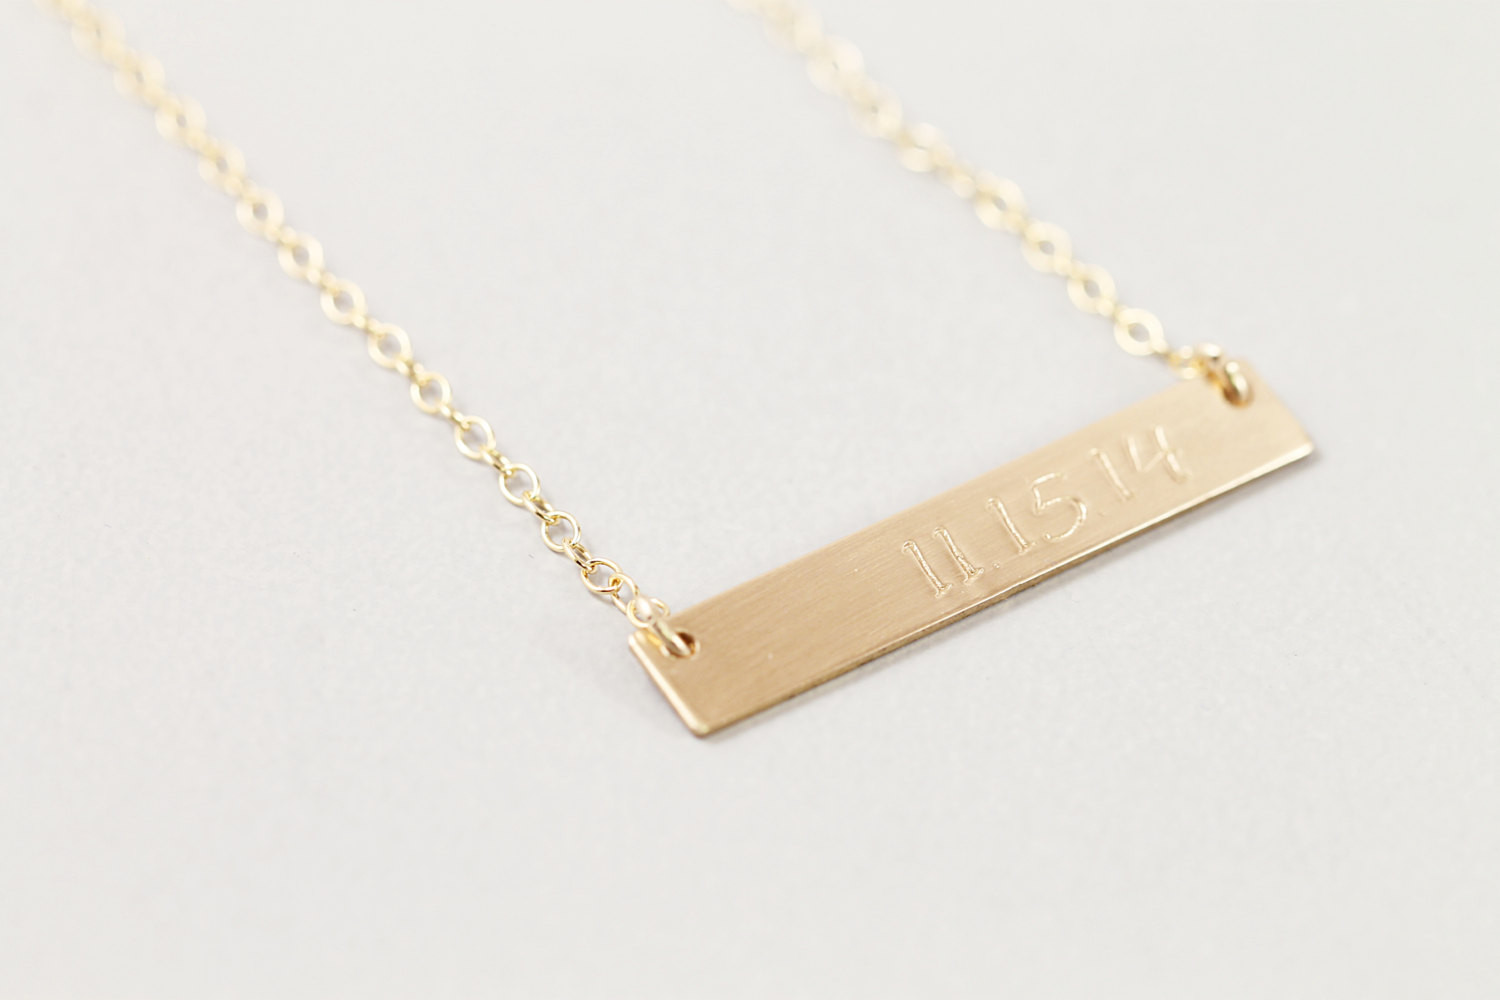 Necklace With Date
 Personalized date necklace gold filled engraved bar by